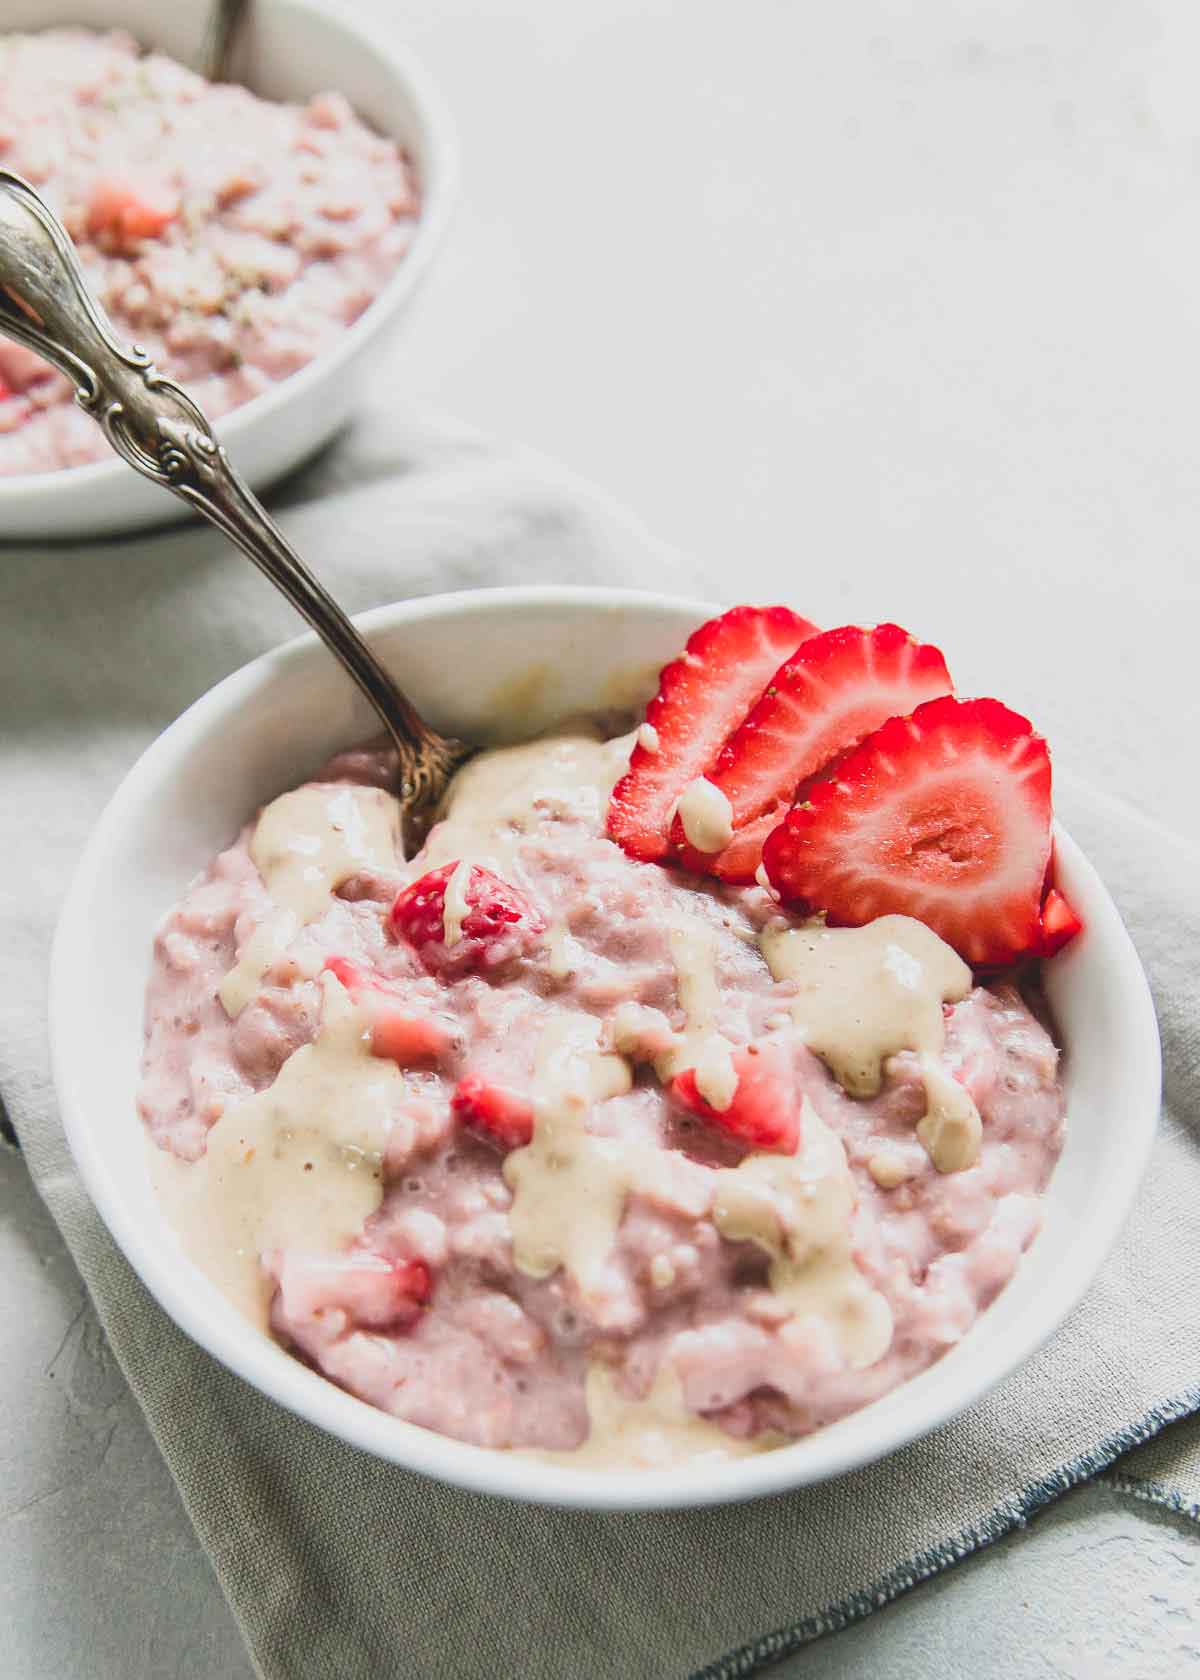 Gluten-free and easily made dairy-free, this strawberry oatmeal recipe is one everyone will love, even the kids.